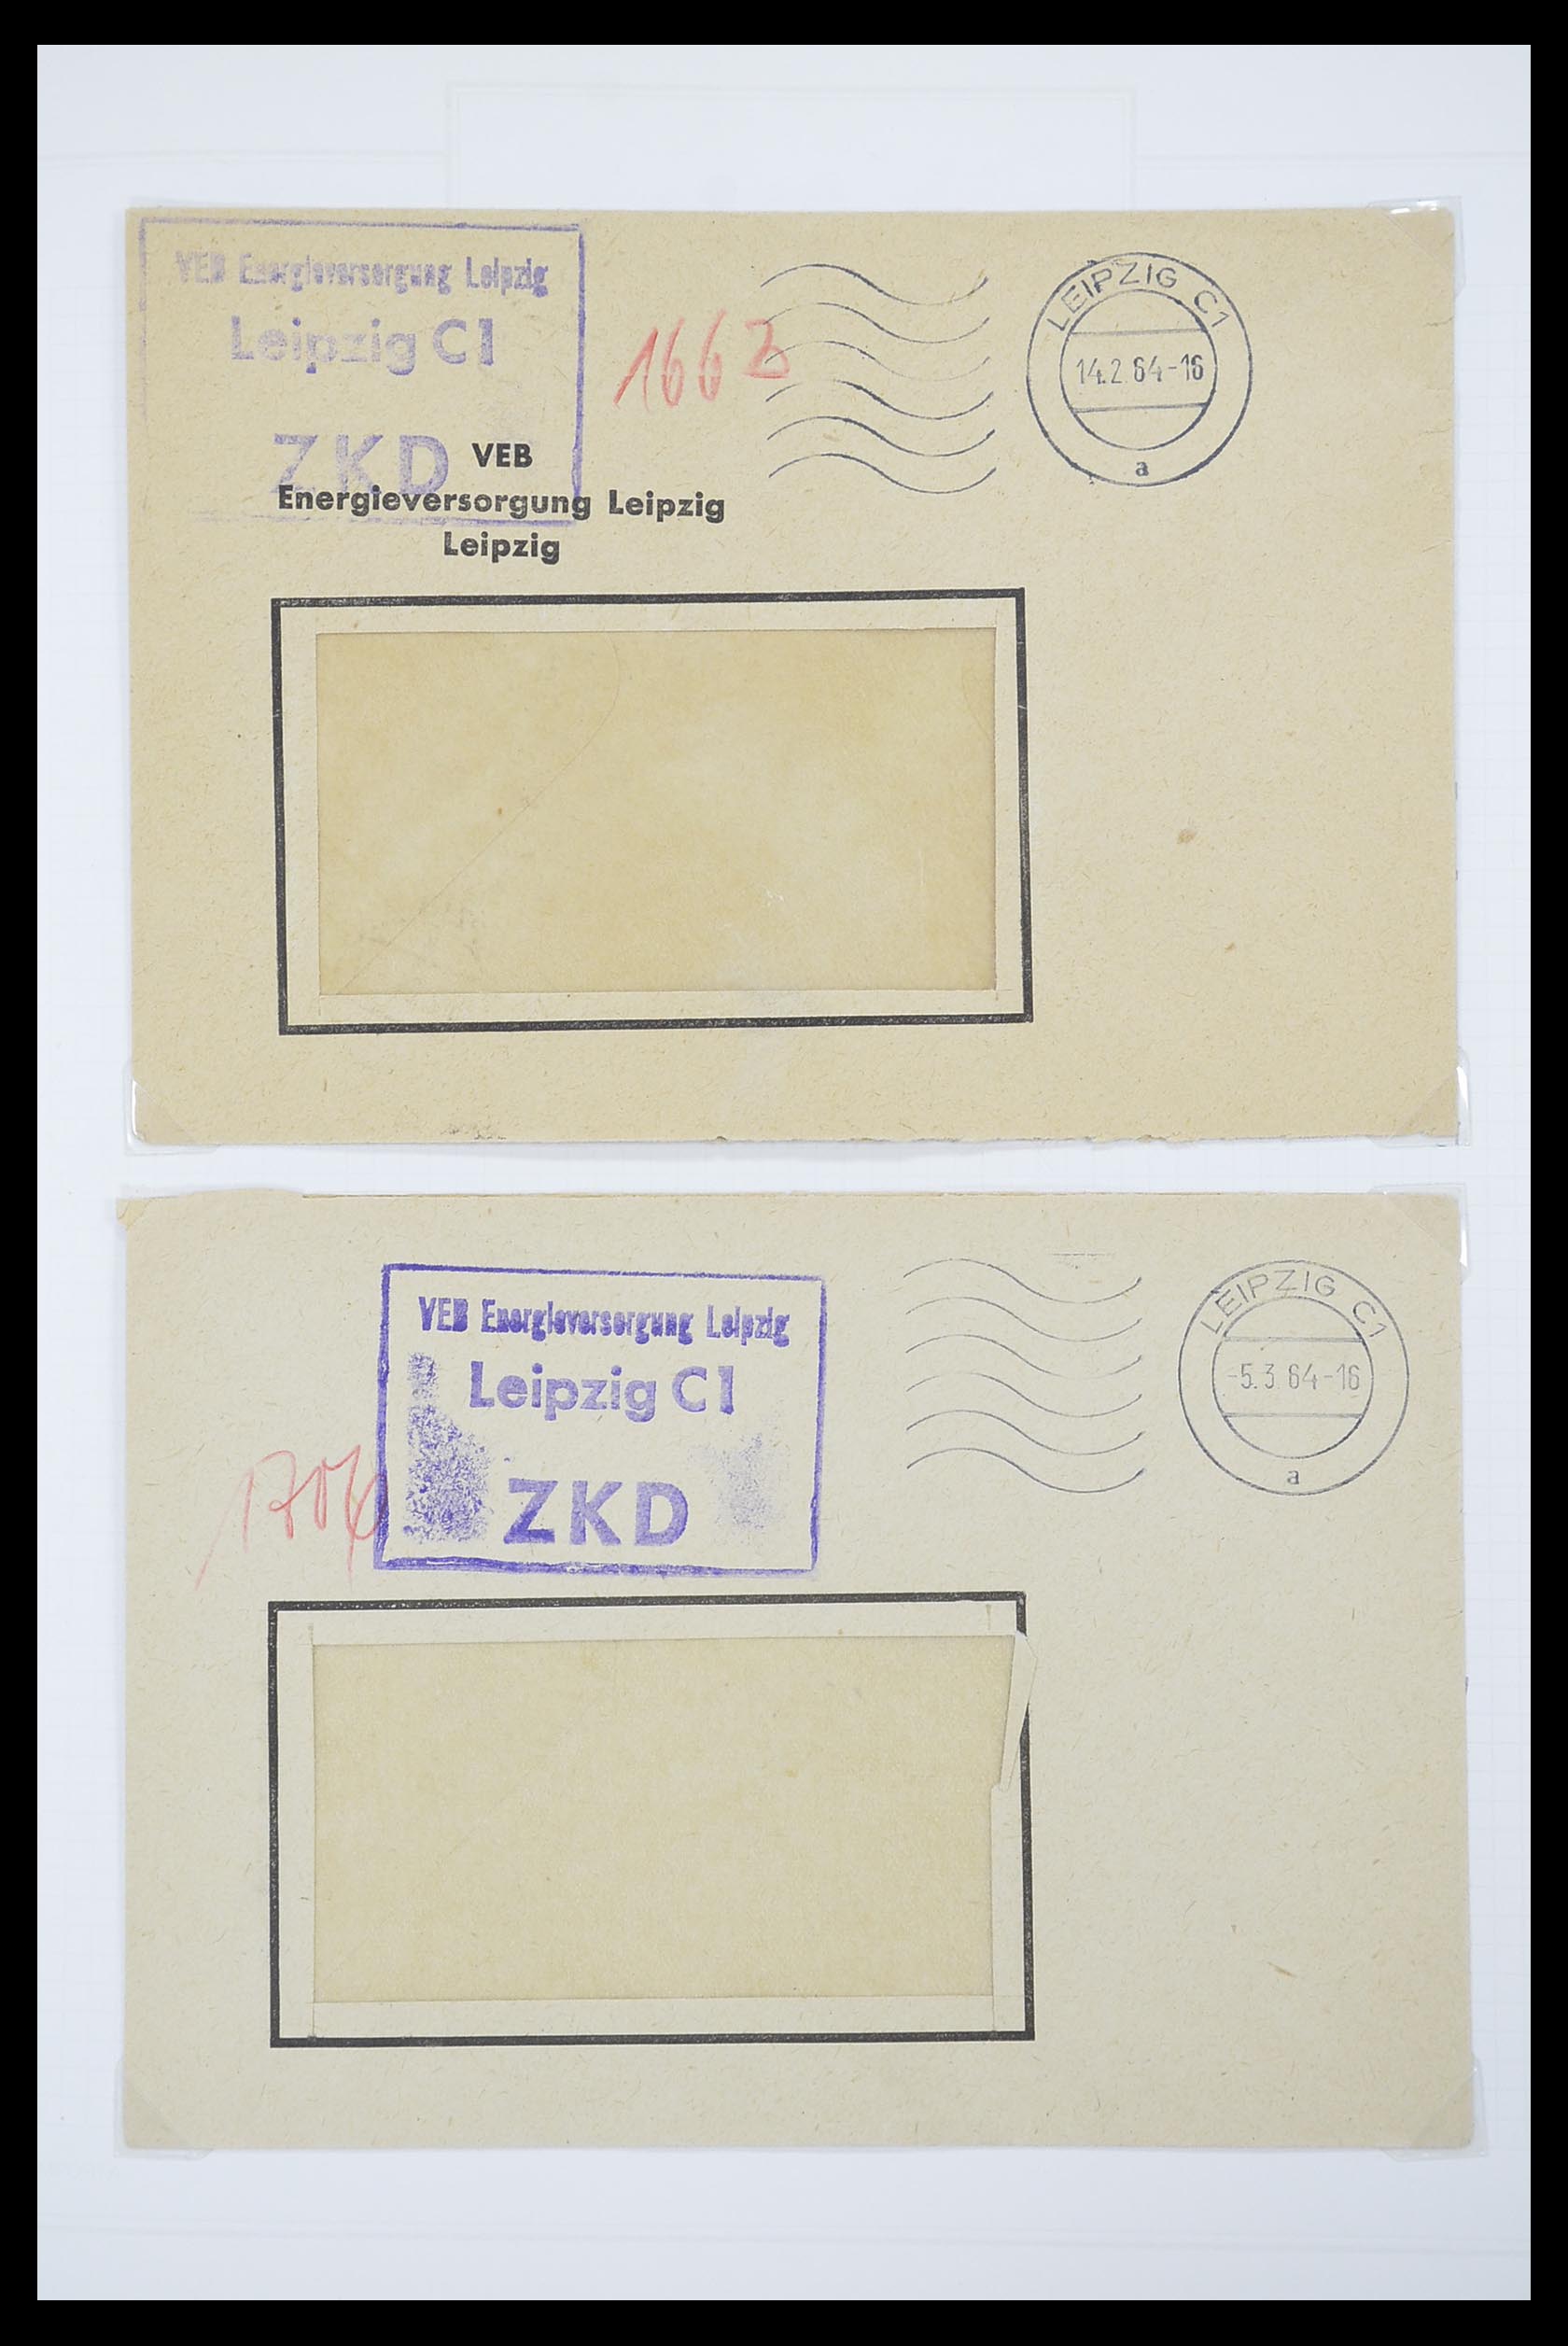 33883 015 - Stamp collection 33883 DDR service covers 1956-1986.